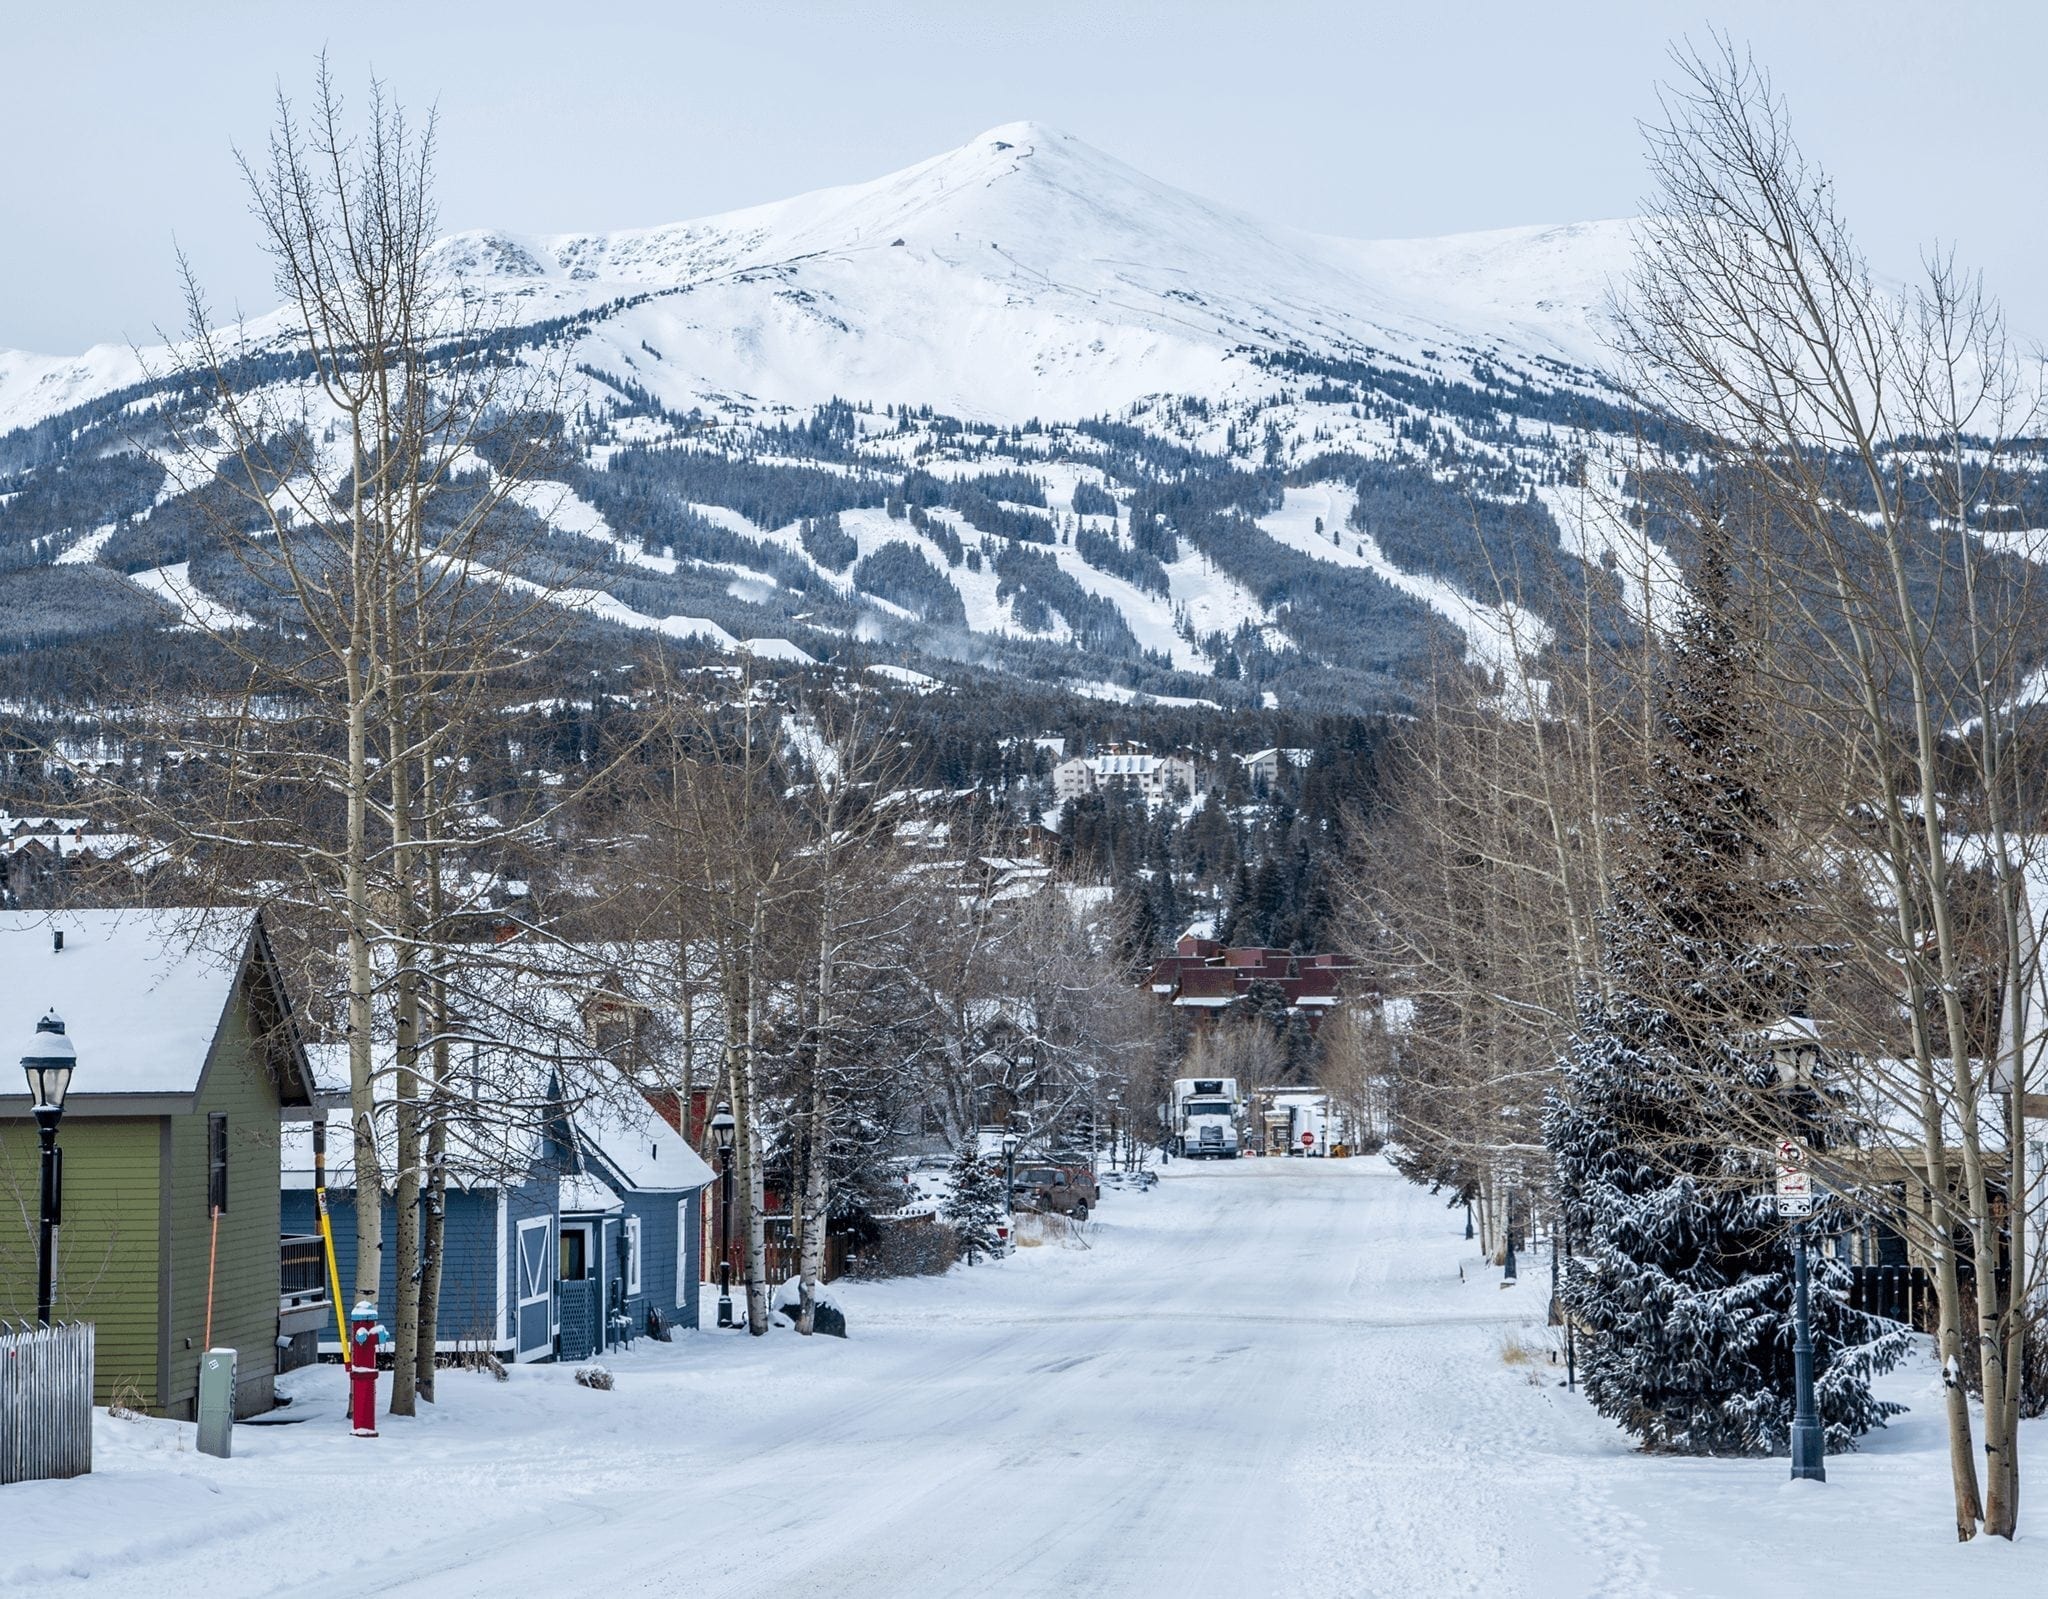 Downtown Breckenridge covered in snow with mountains in distance.